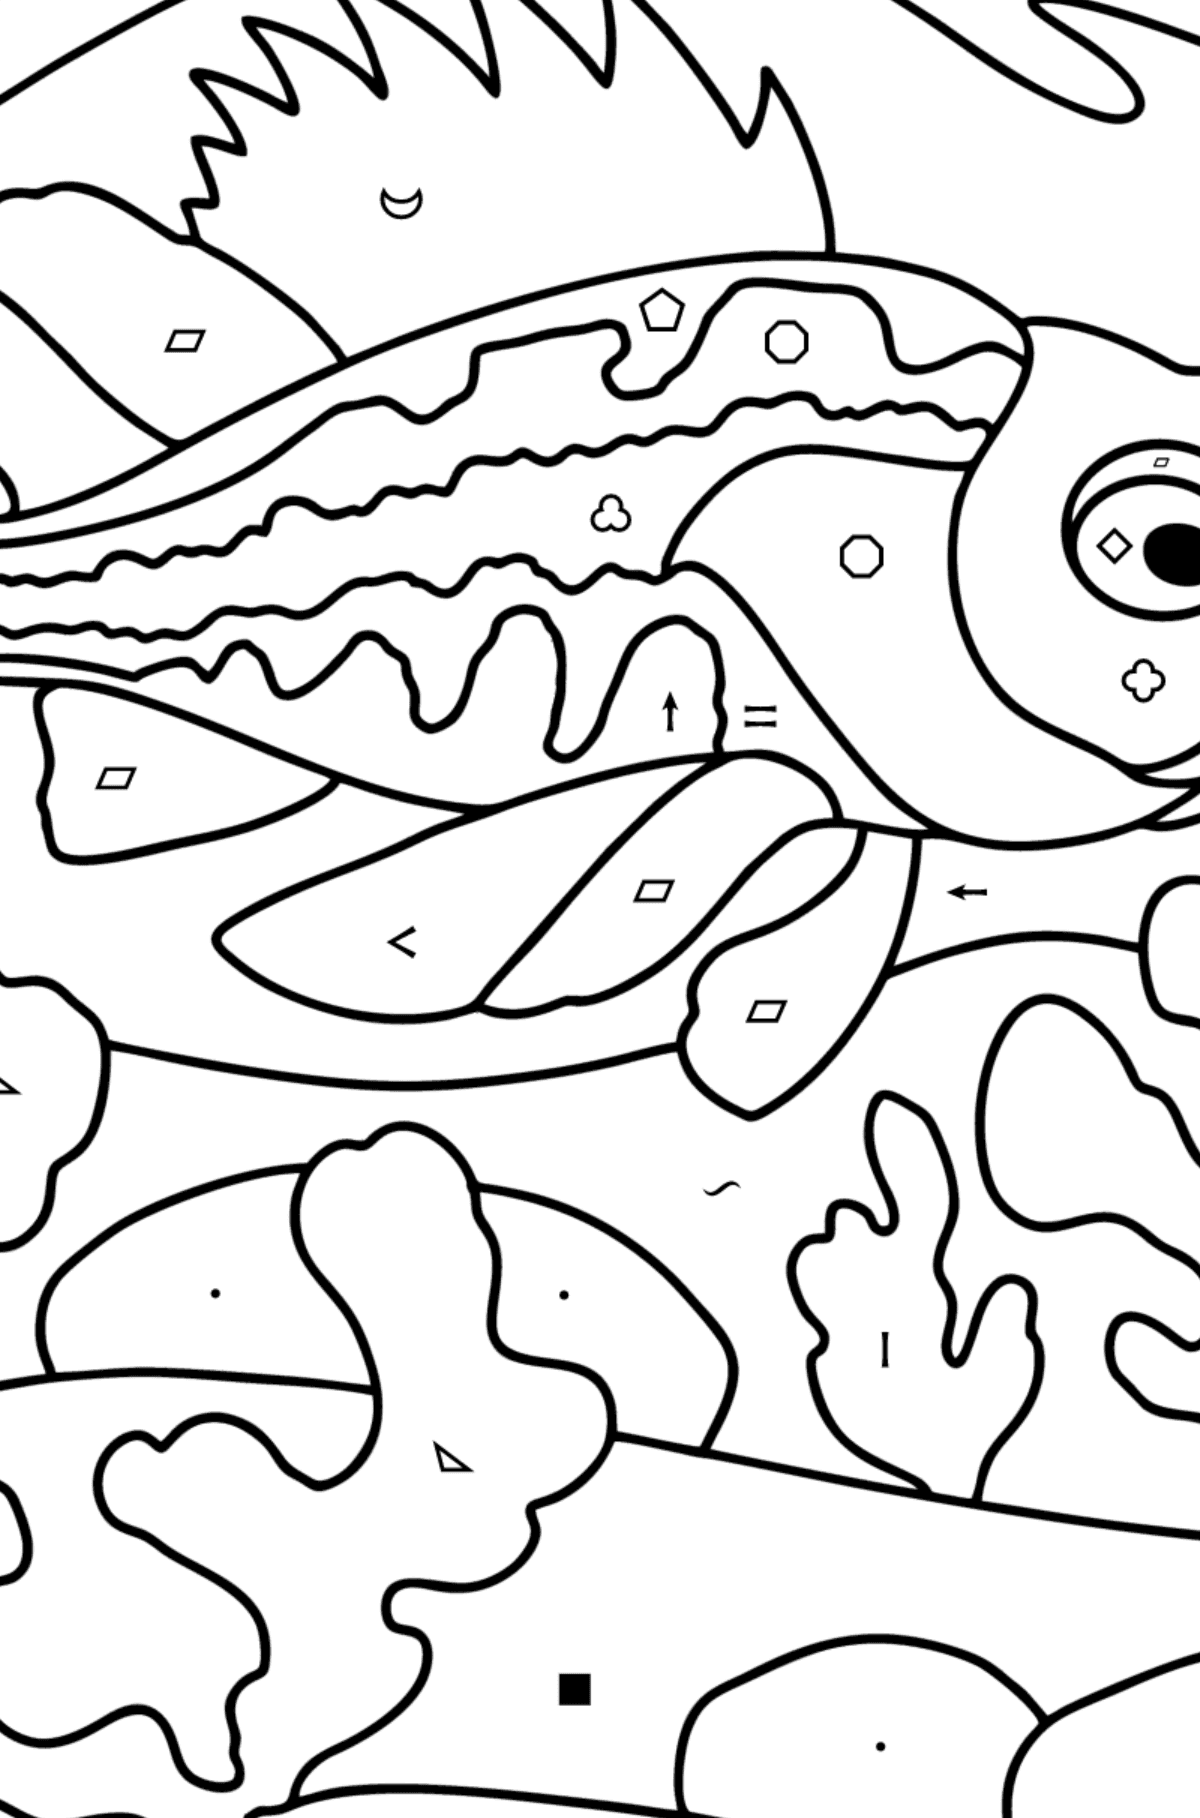 Sea bass coloring page - Coloring by Symbols and Geometric Shapes for Kids